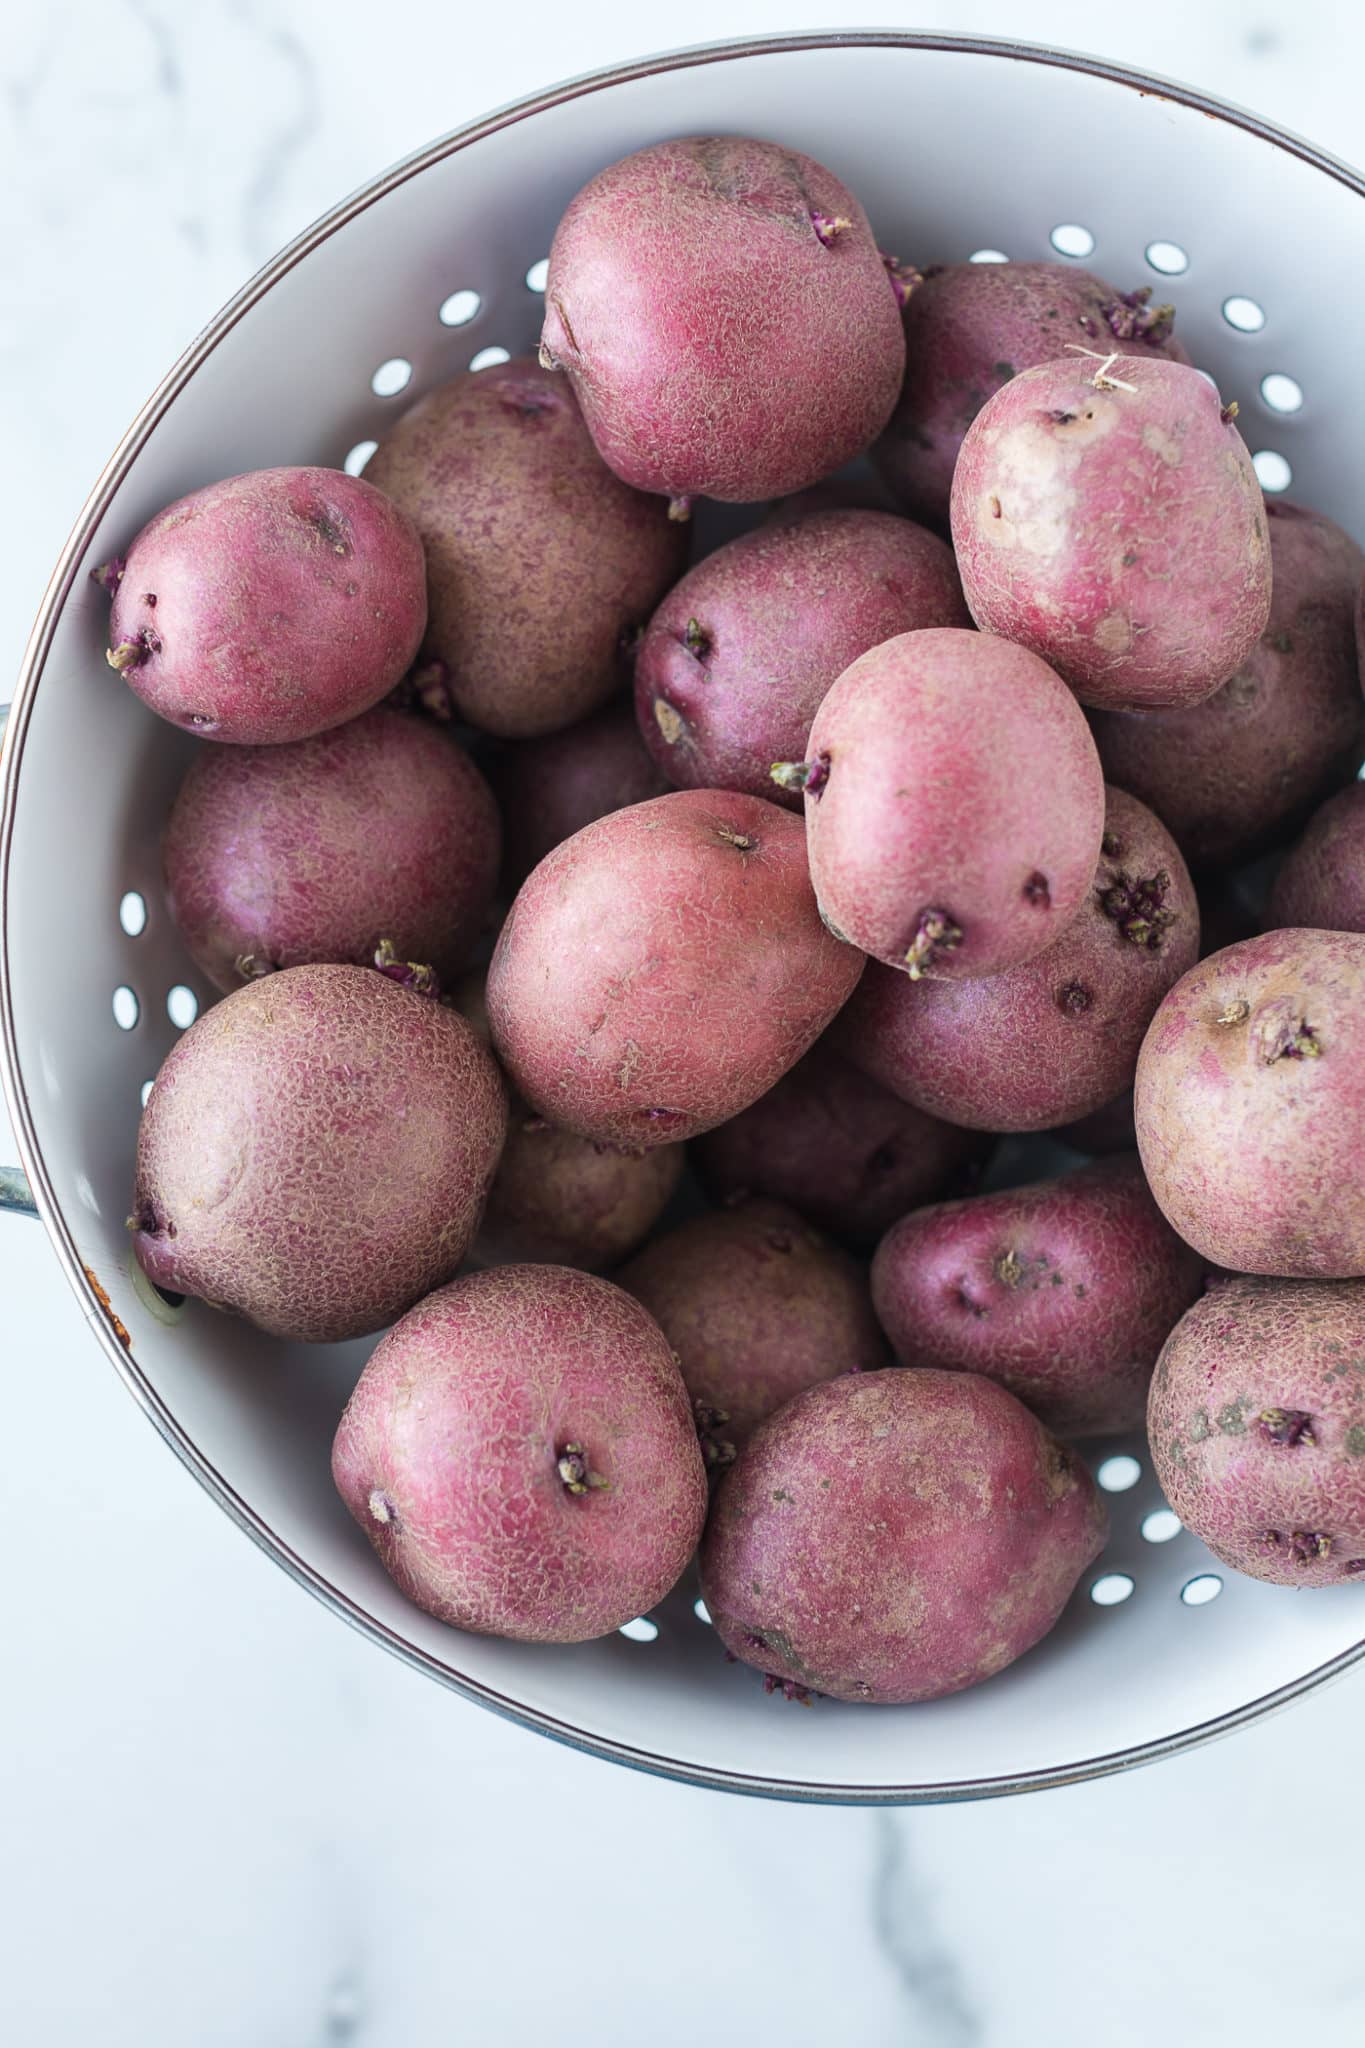 uncooked red potatoes in a colander.